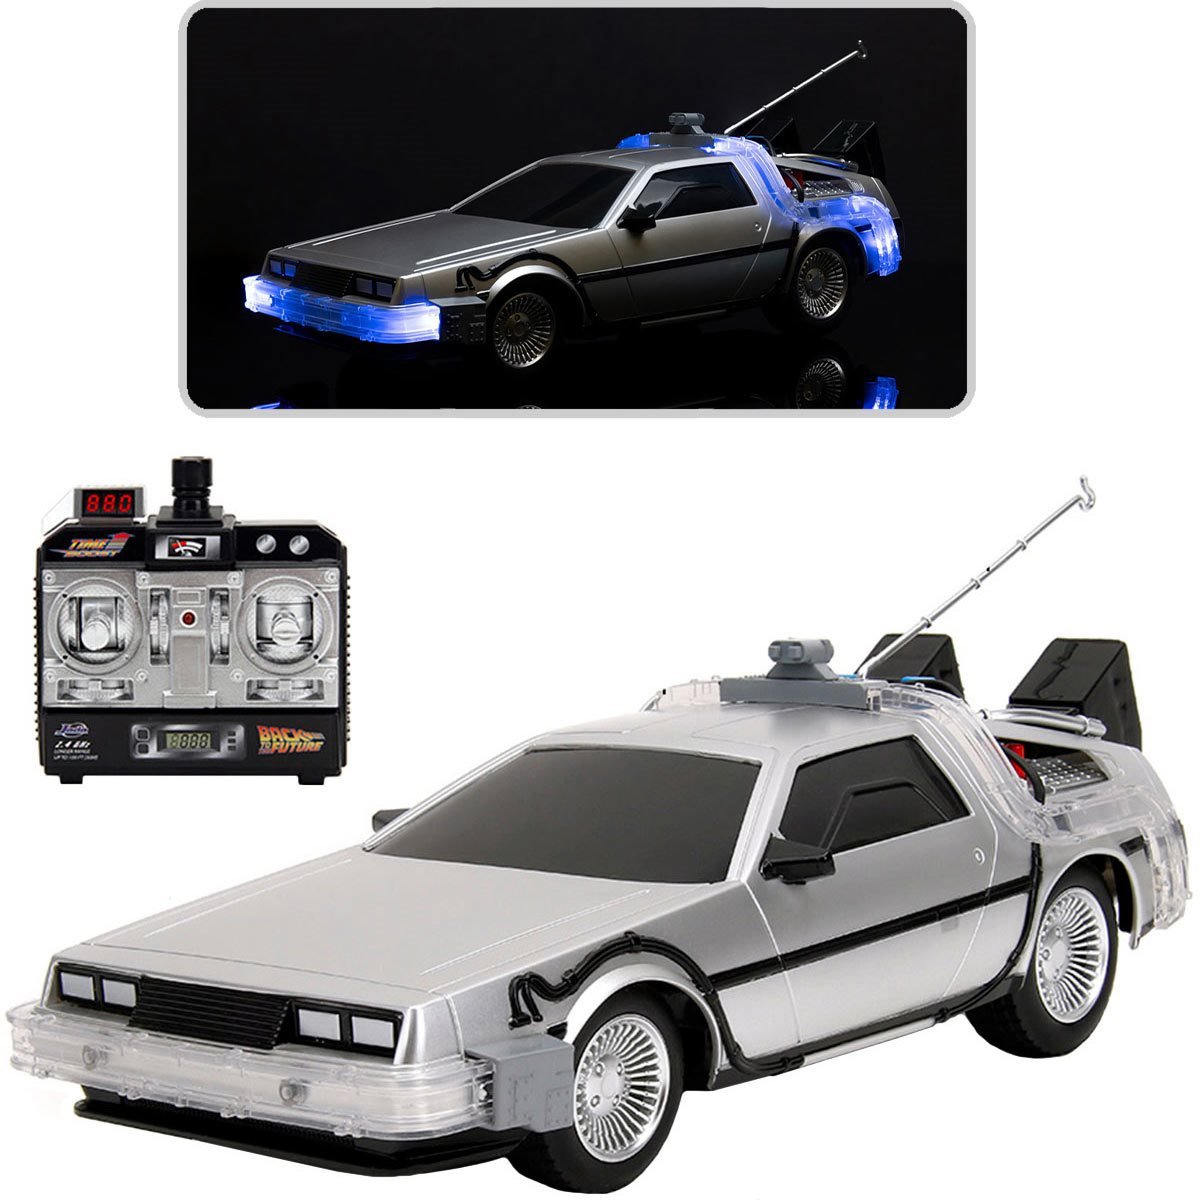 Jada Toys Back to The Future Part III 1:32 Time Machine Die-cast Car, Toys  for Kids and Adults